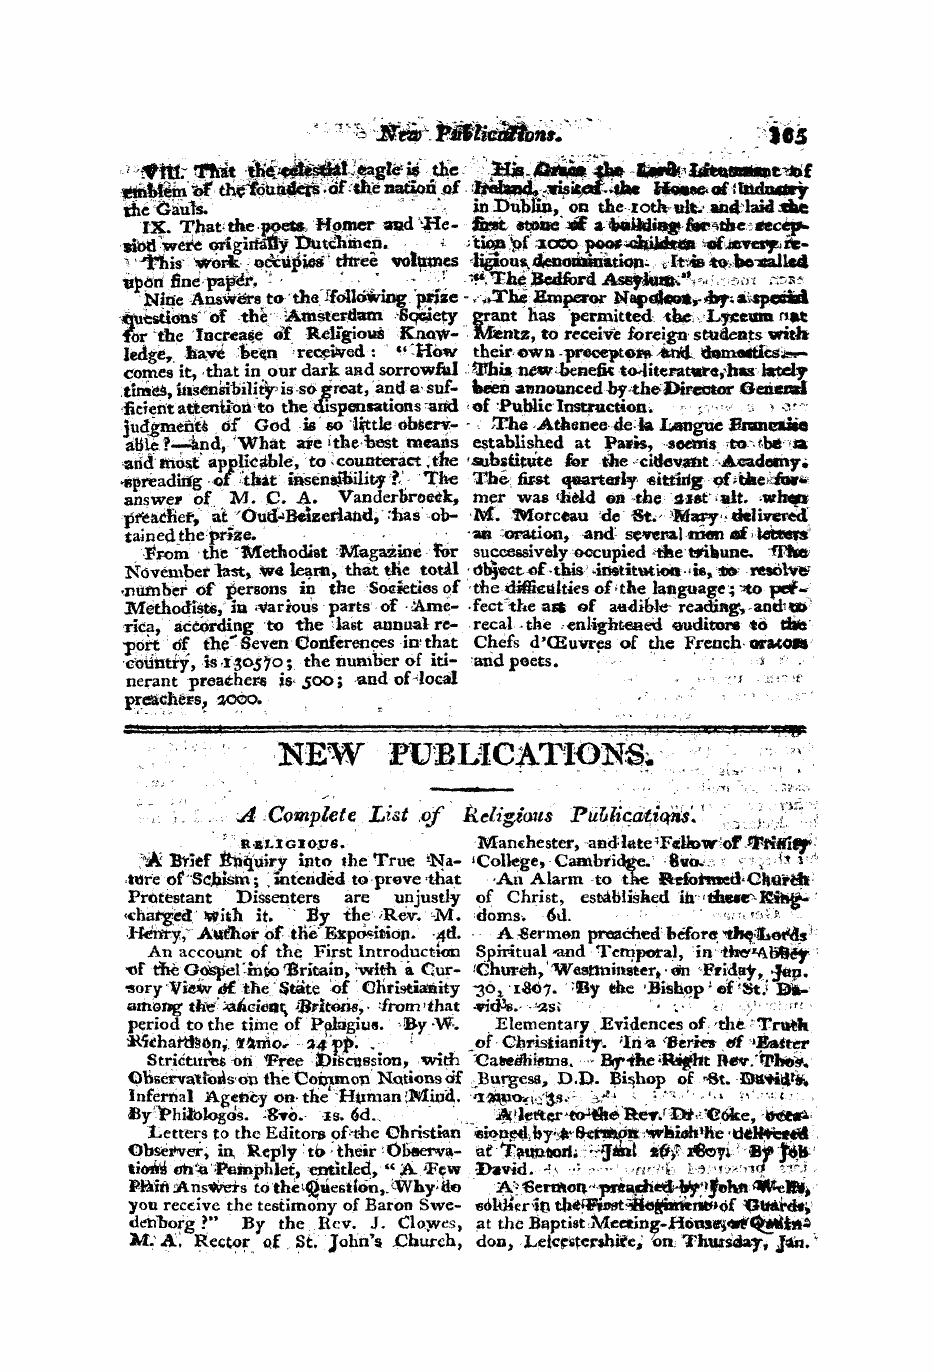 Monthly Repository (1806-1838) and Unitarian Chronicle (1832-1833): F Y, 1st edition: 53